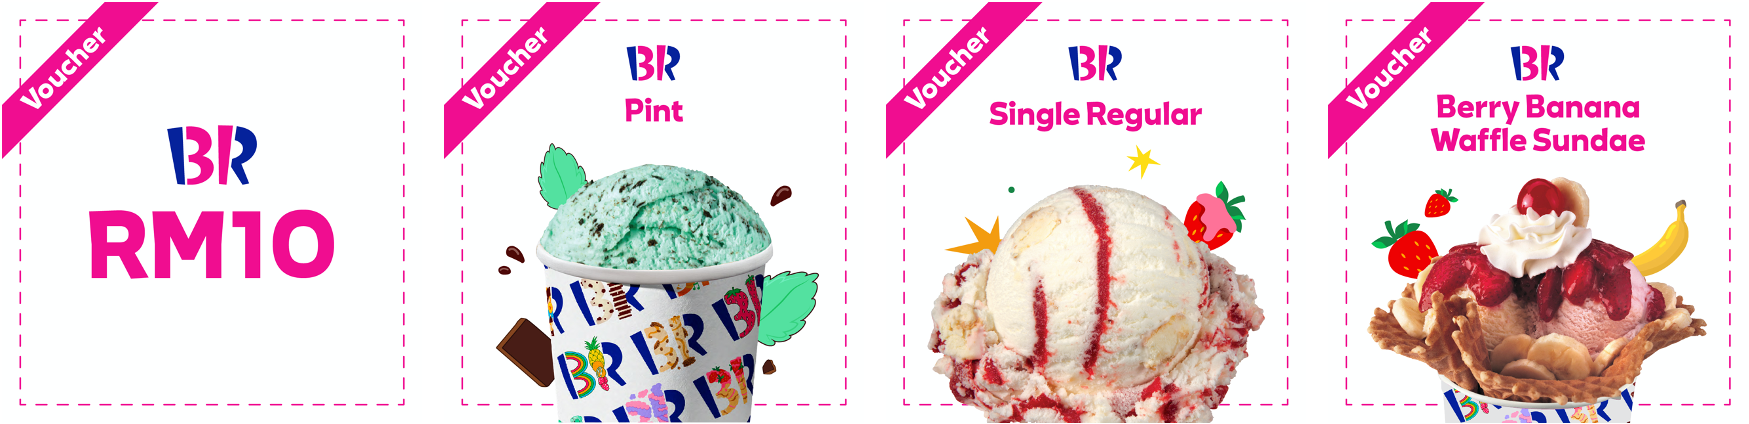 Giftee Provides Egift System To Baskin Robbins Malaysia Local Malaysian Company Golden Scoop Sdn Bhd Launching Egift Services To All Its 130 Outlets Of Ice Cream Specialty Store Giftee Inc